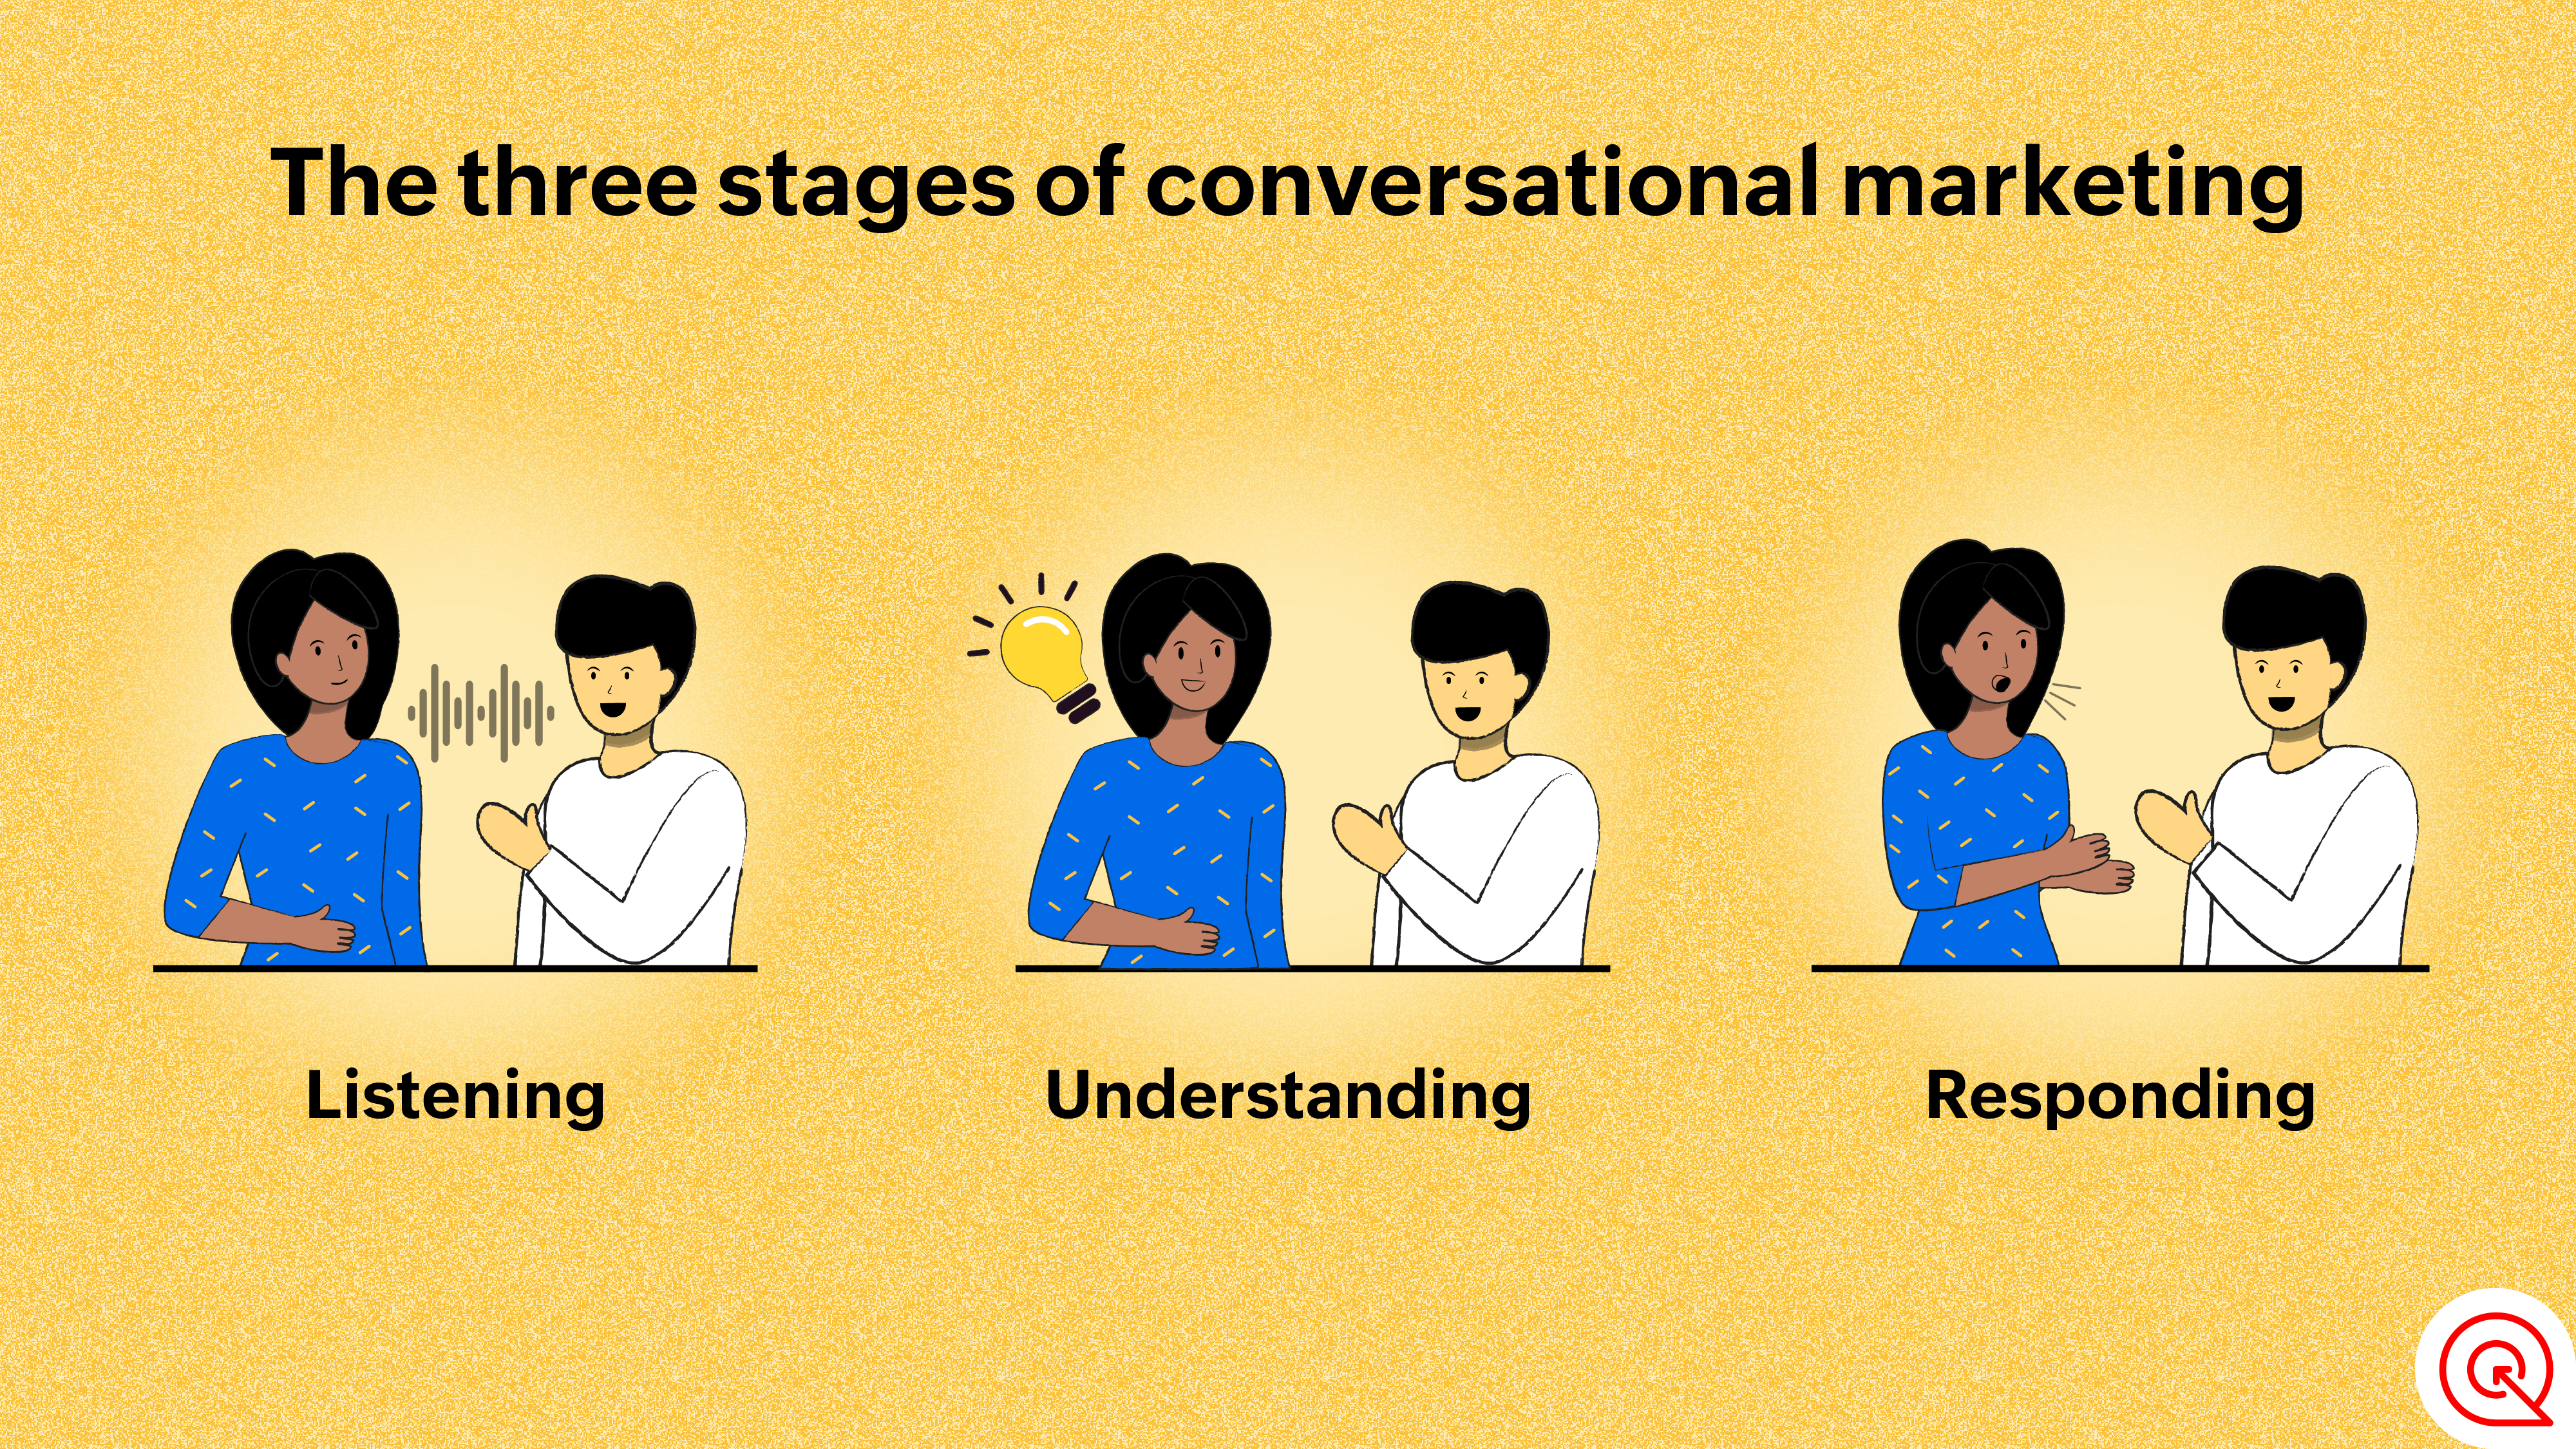 The three stages of conversational marketing